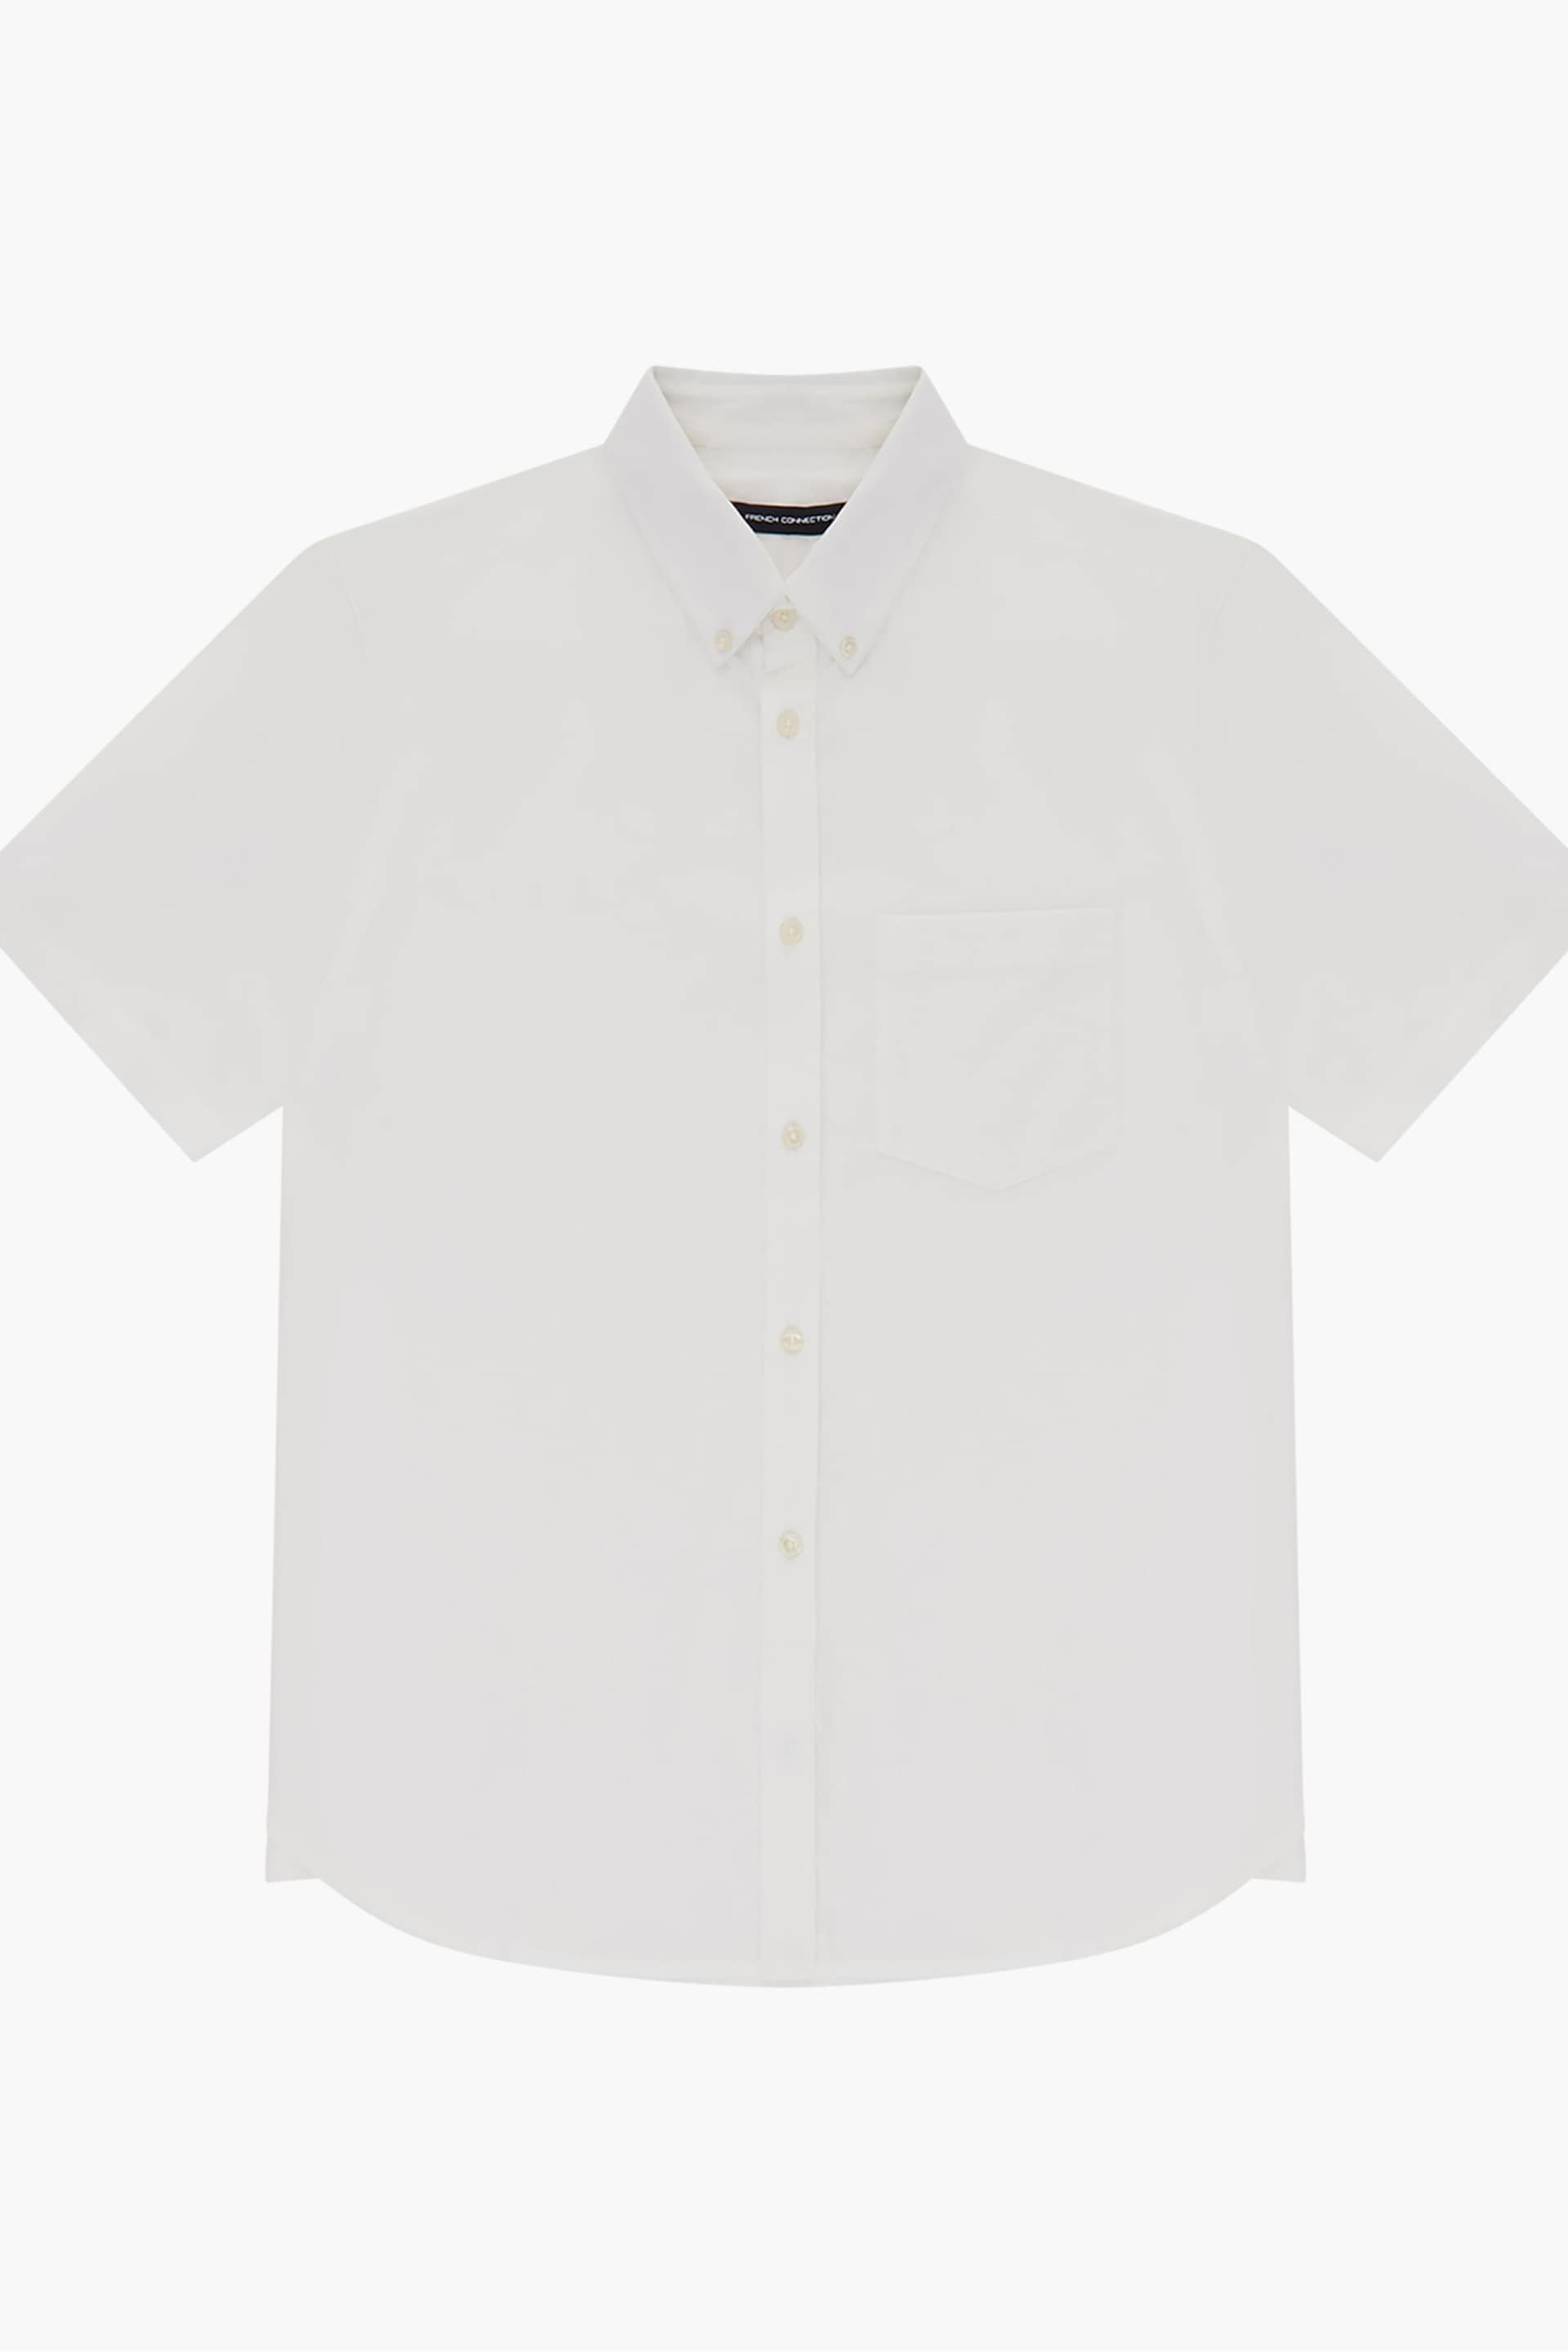 French Connection Oxford Short Sleeve White Shirt - Image 4 of 4